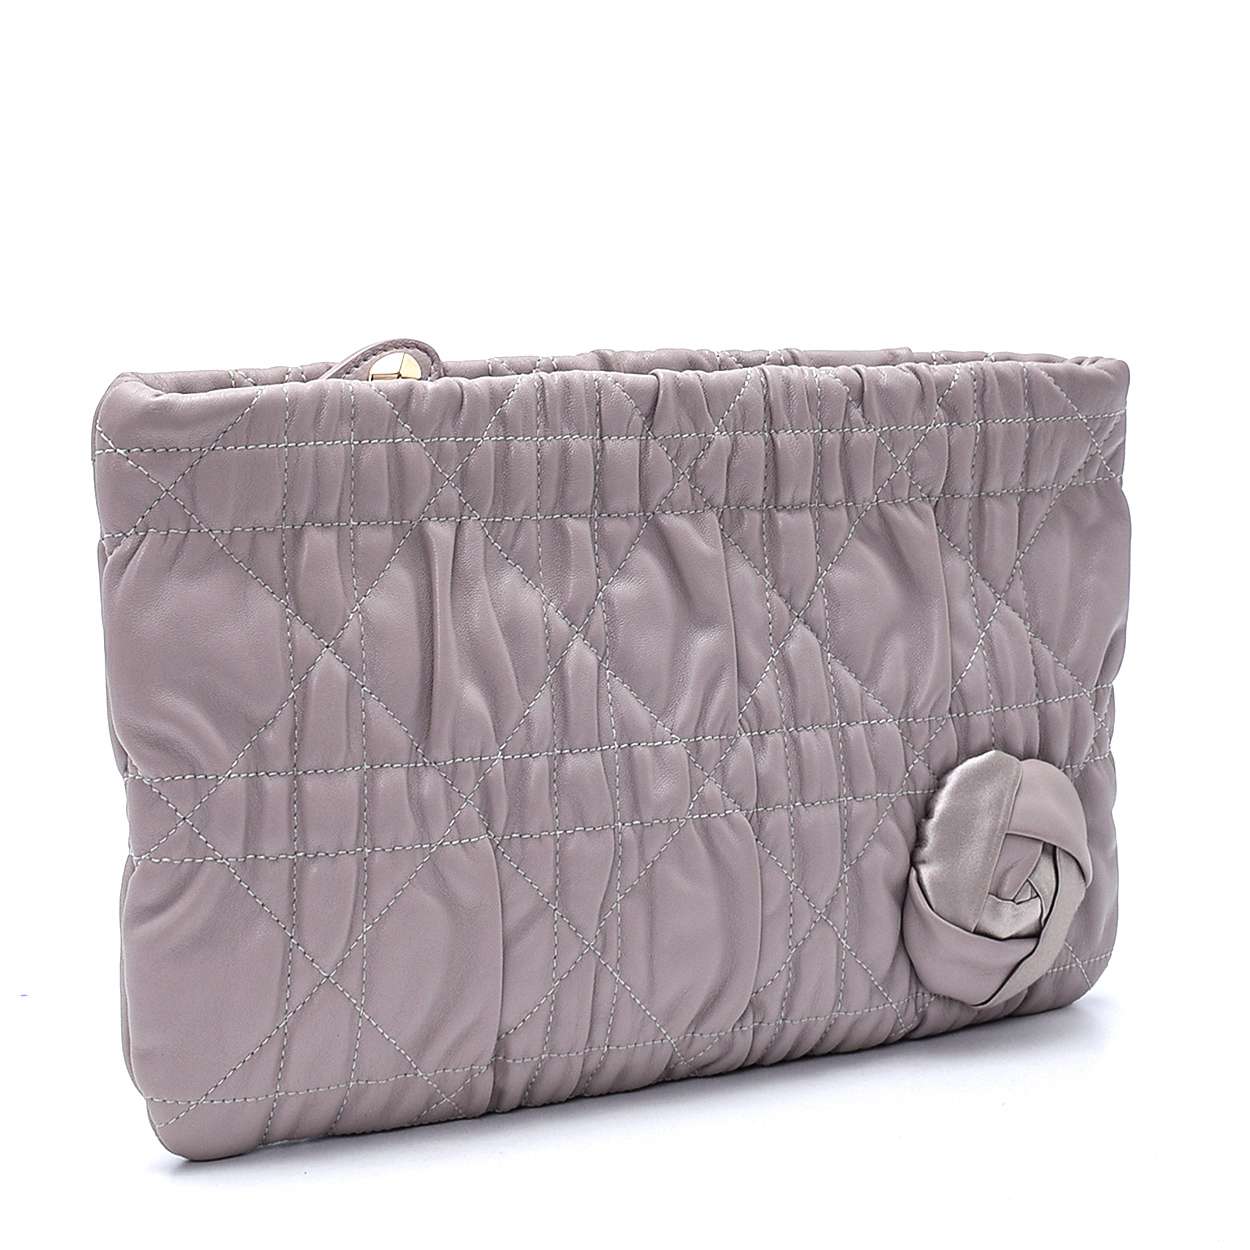 Christian Dior - Lilac Delices Lambskin Leather Clutch 